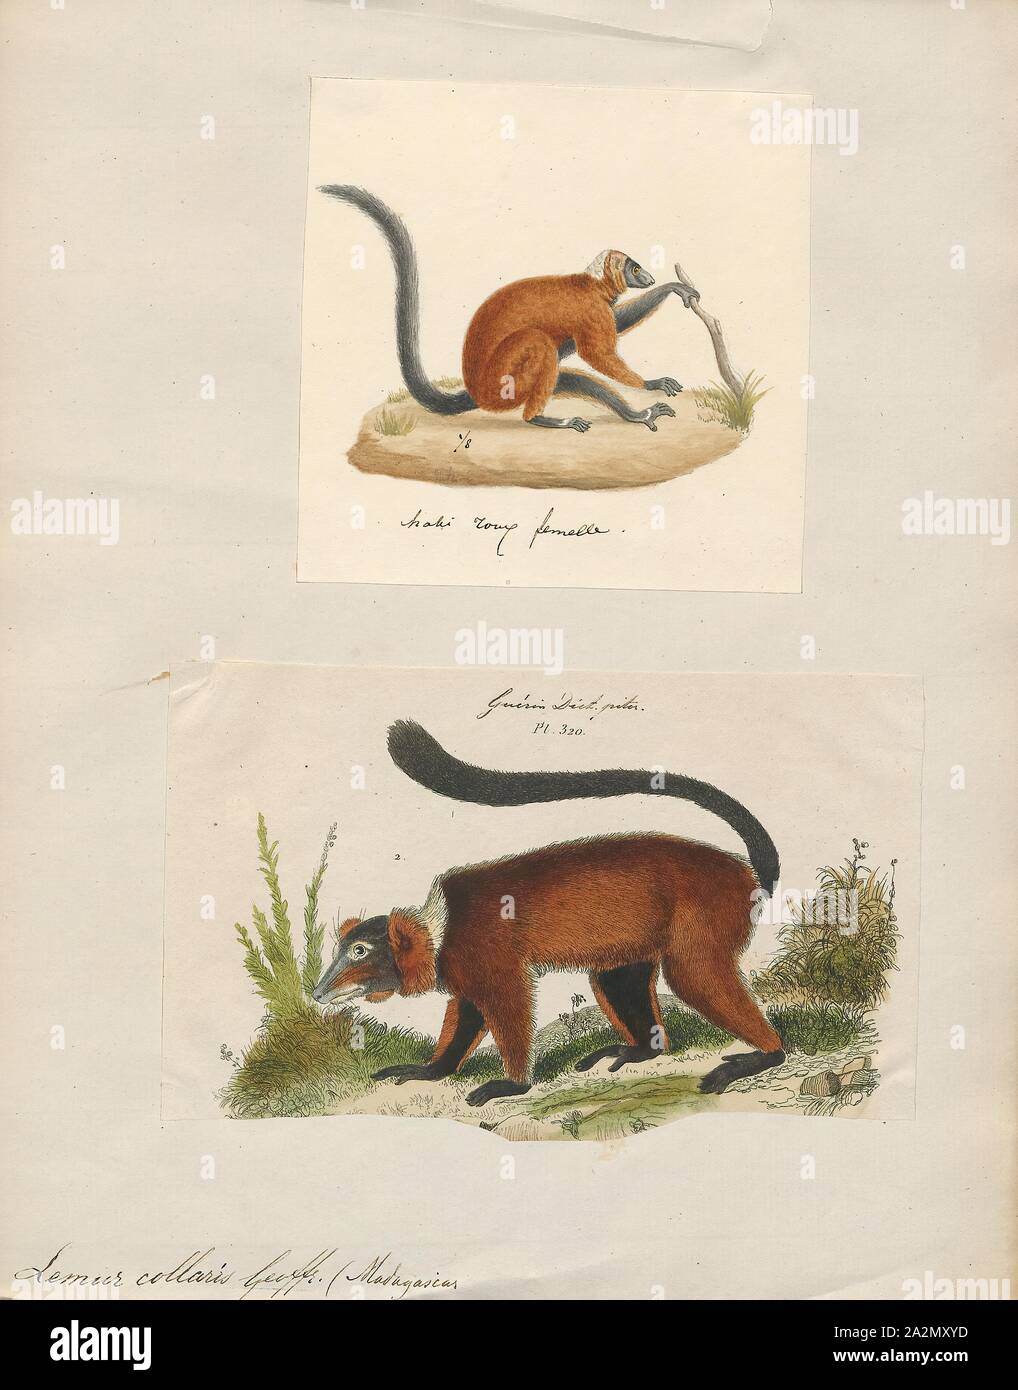 Lemur collaris, Print, Lemurs (from Latin lemures – ghosts or spirits) are mammals of the order Primates, divided into 8 families and consisting of 15 genera and around 100 existing species. They are native only to the island of Madagascar. Most existing lemurs are small, have a pointed snout, large eyes, and a long tail. They chiefly live in trees (arboreal), and are active at night (nocturnal)., 1700-1880 Stock Photo